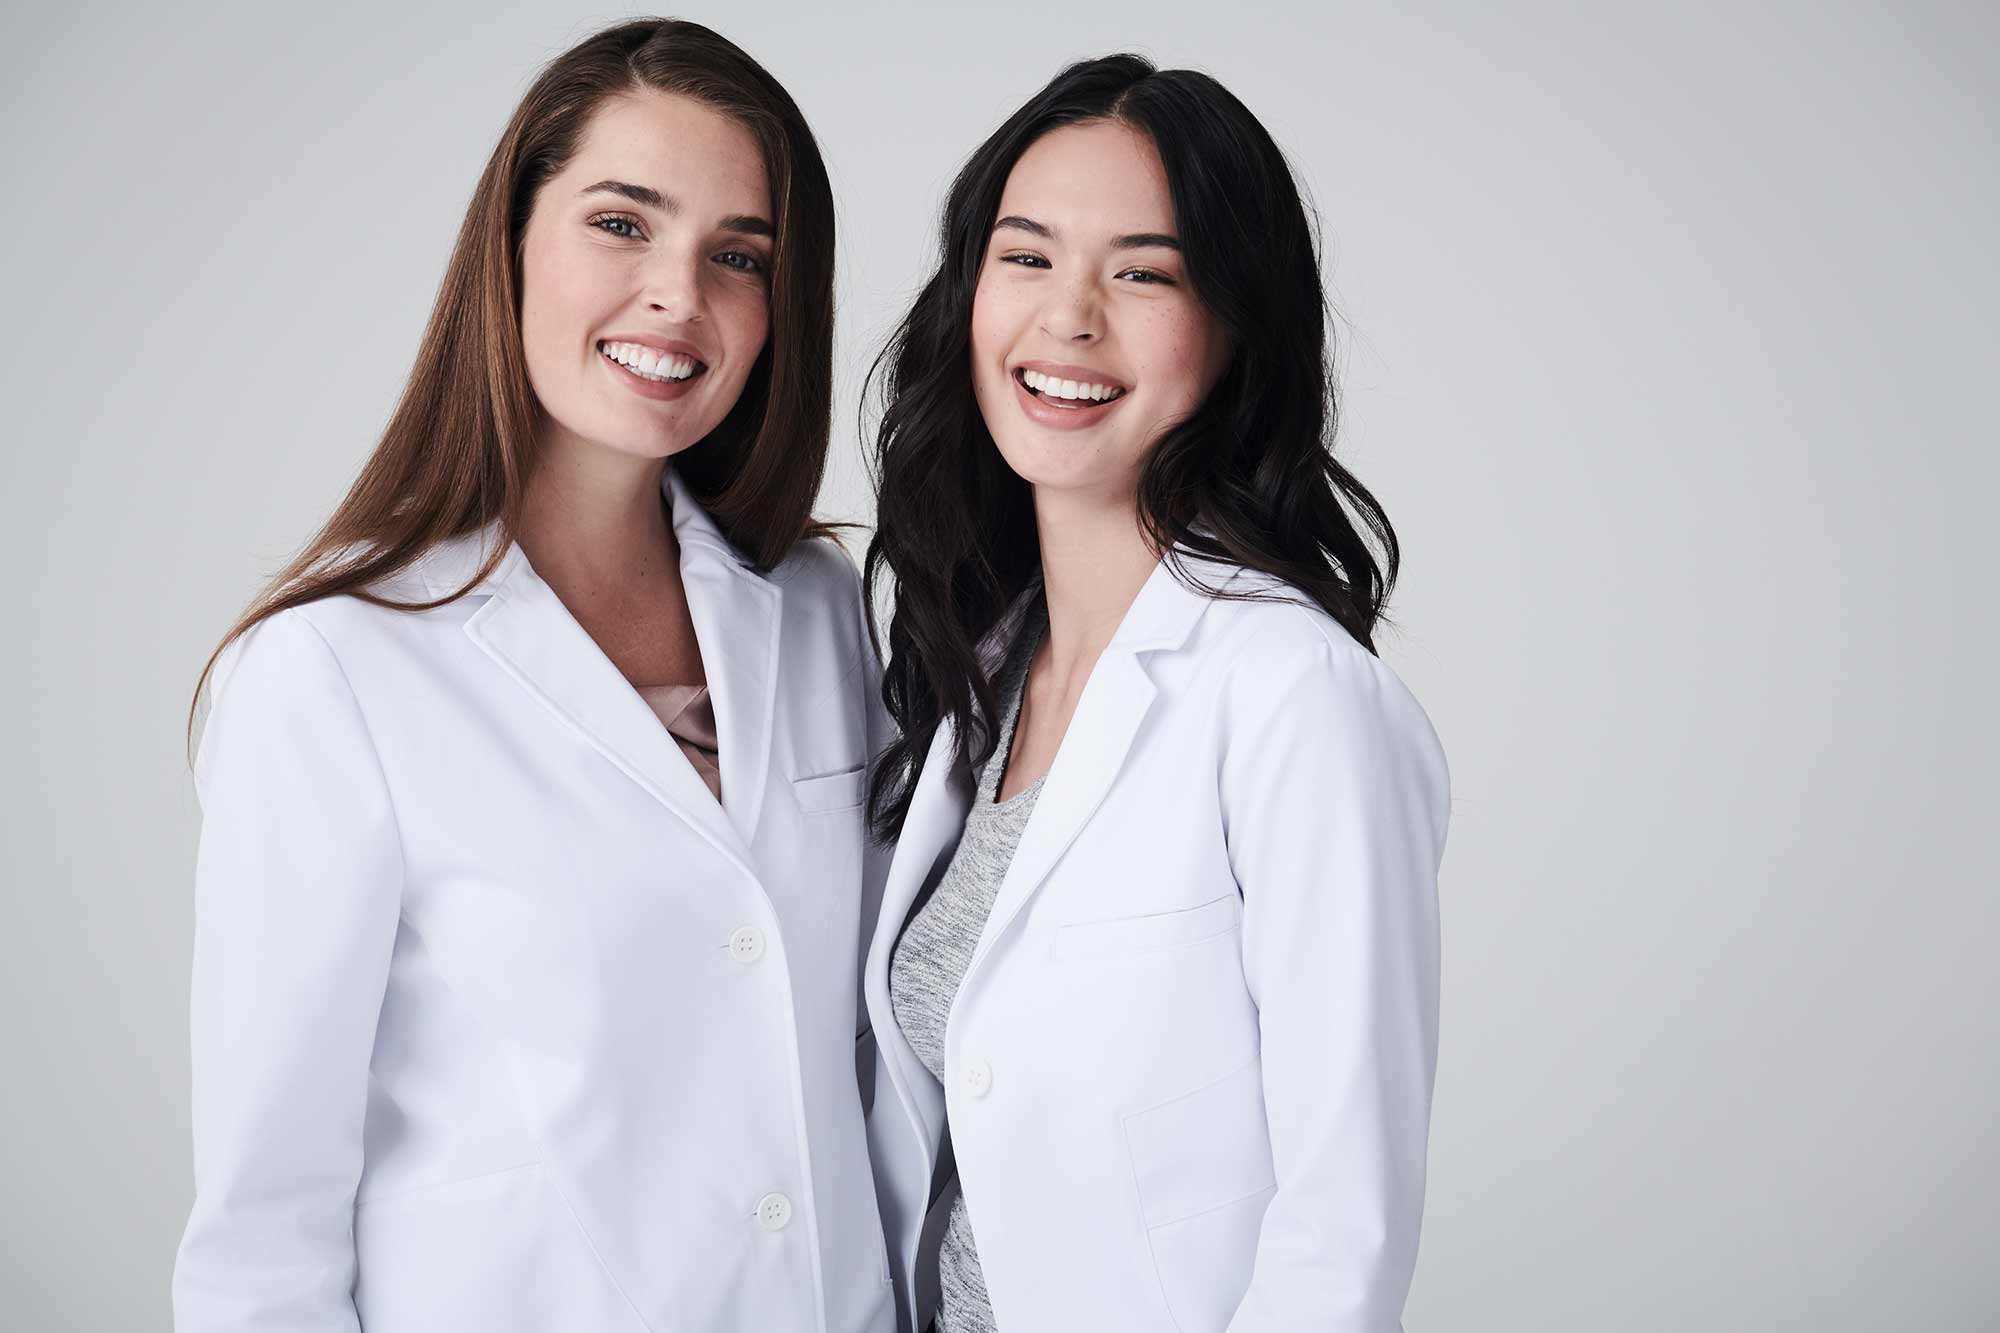 WHAT TO WEAR WITH (AND UNDER) A LAB COAT